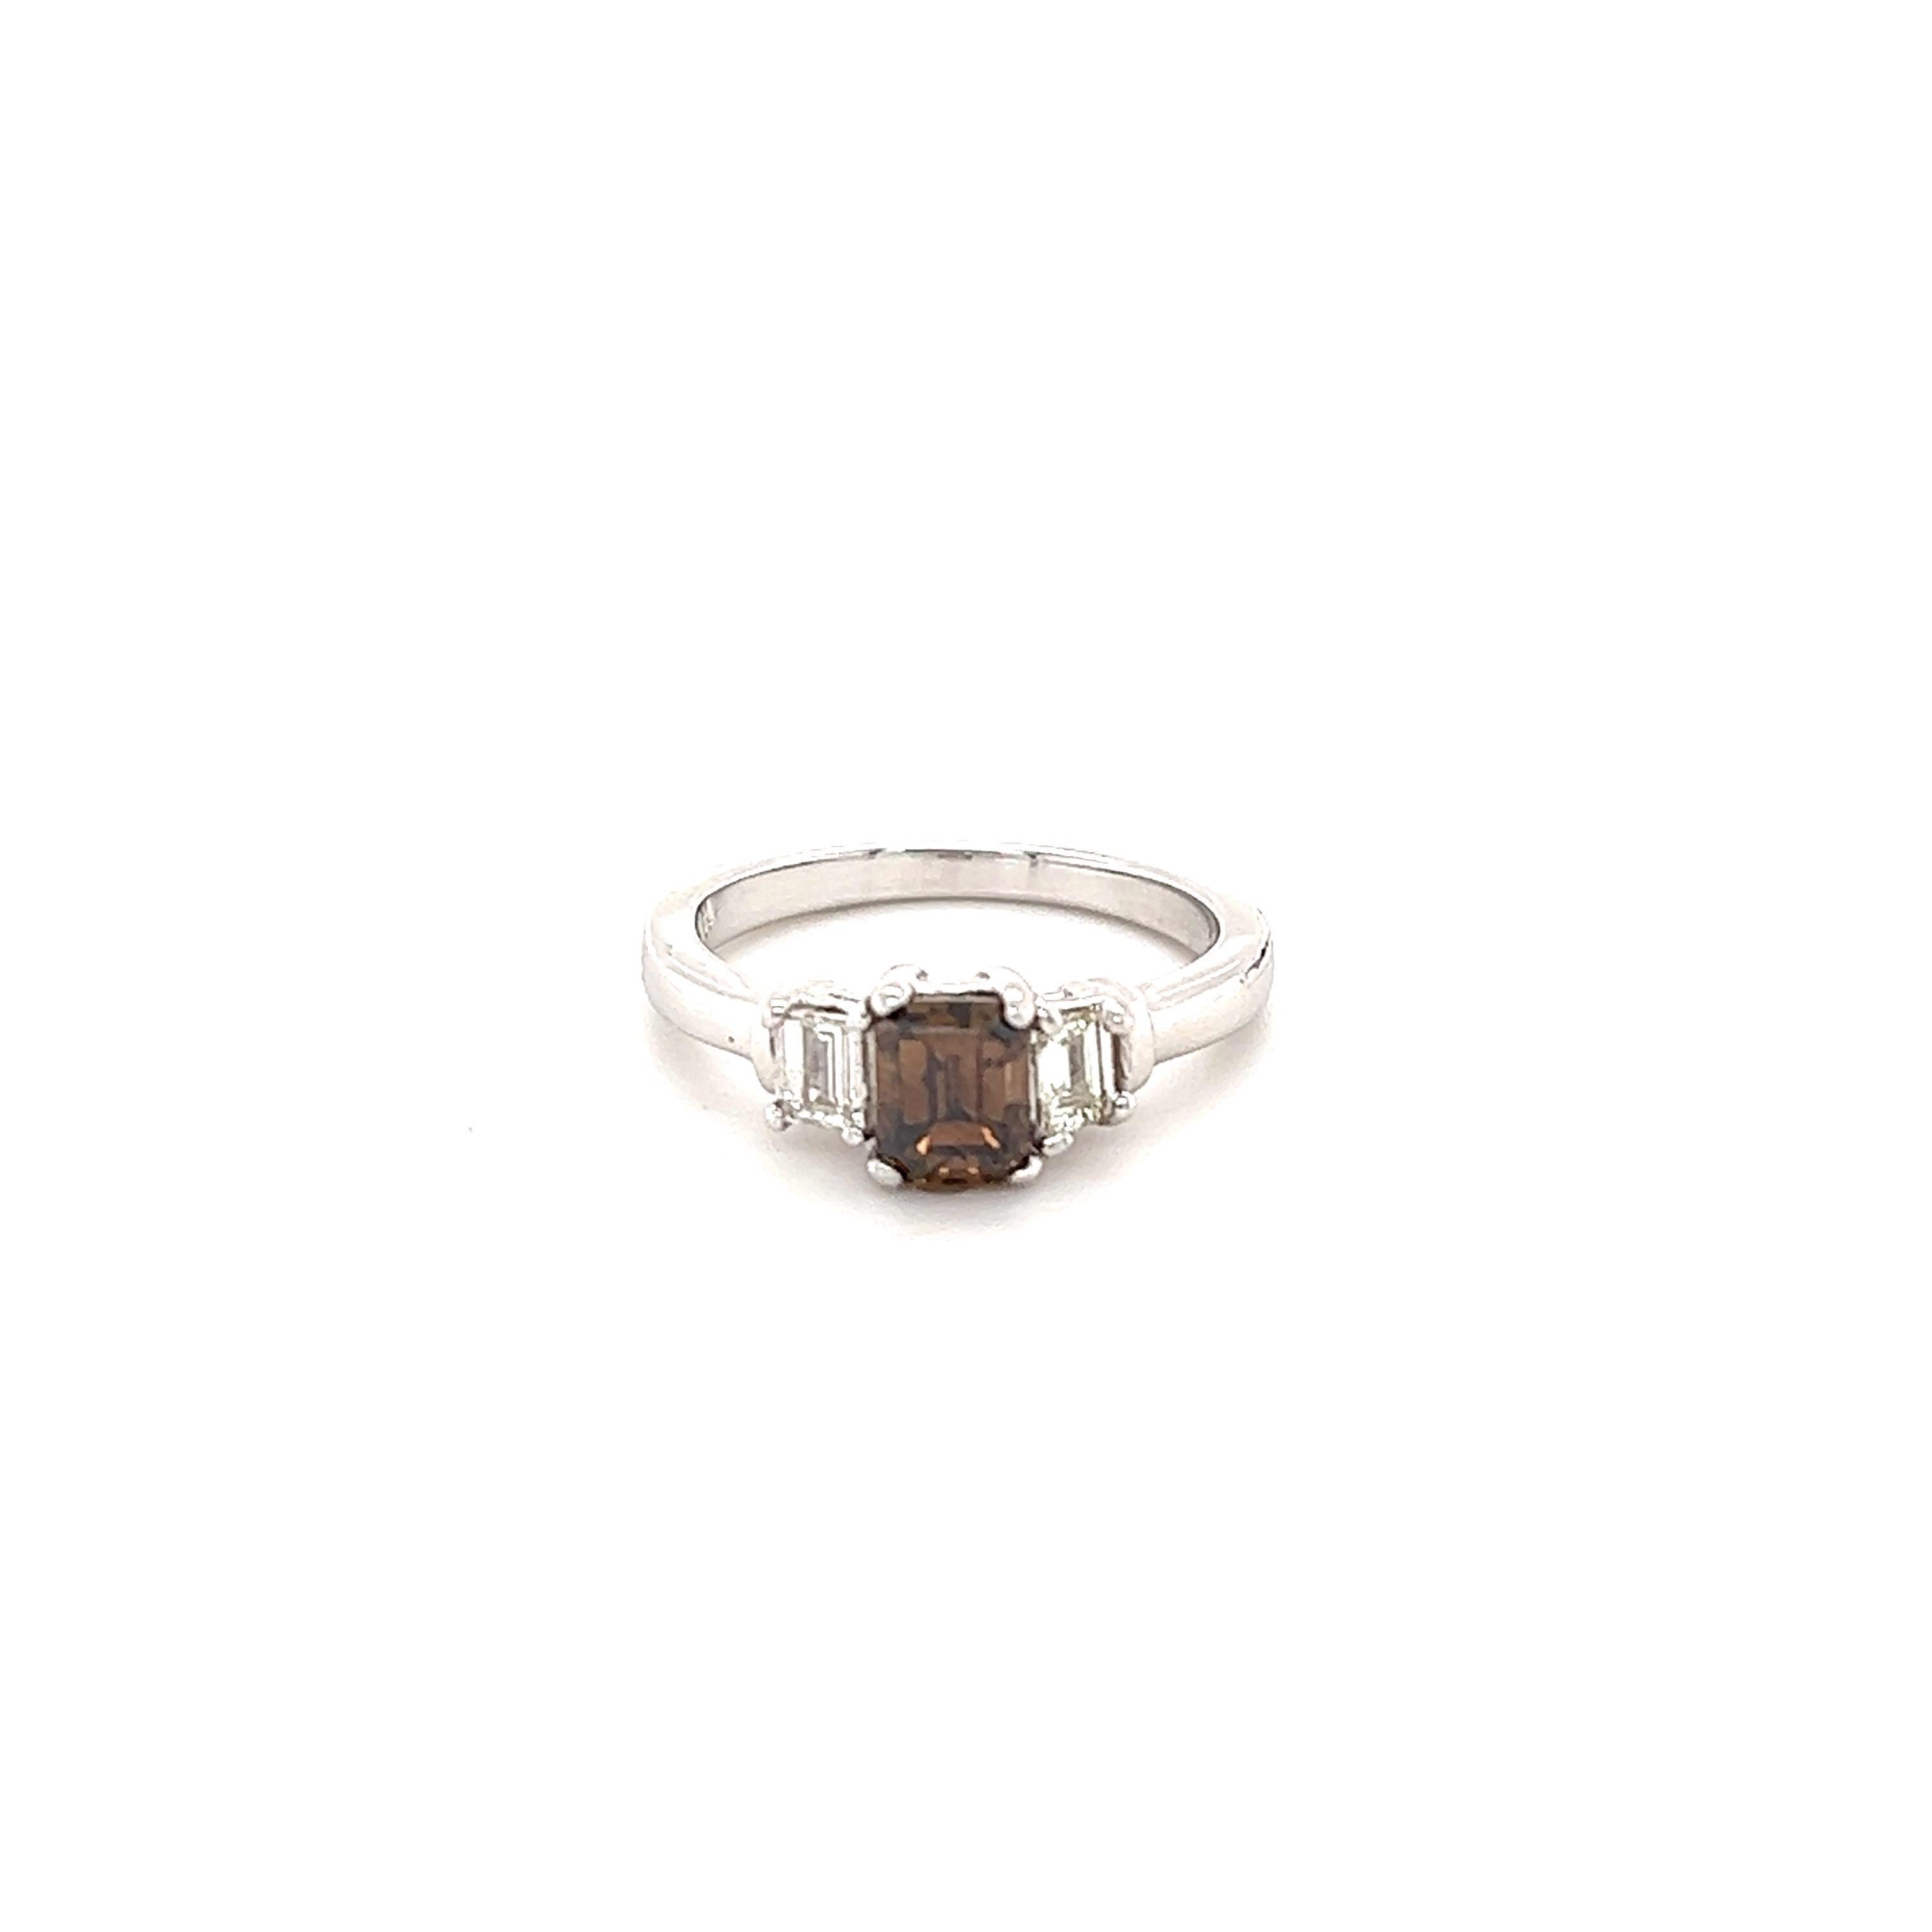  Brown Diamond Three Stone Engagement Ring

The Emerald Cut Brown Diamond weighs 1.02 Carats and has 2 Baguette Cut Diamonds on each side that weigh 0.31 Carats. The Clarity and Color of the Diamonds are VS-F. The total carat weight of the ring is